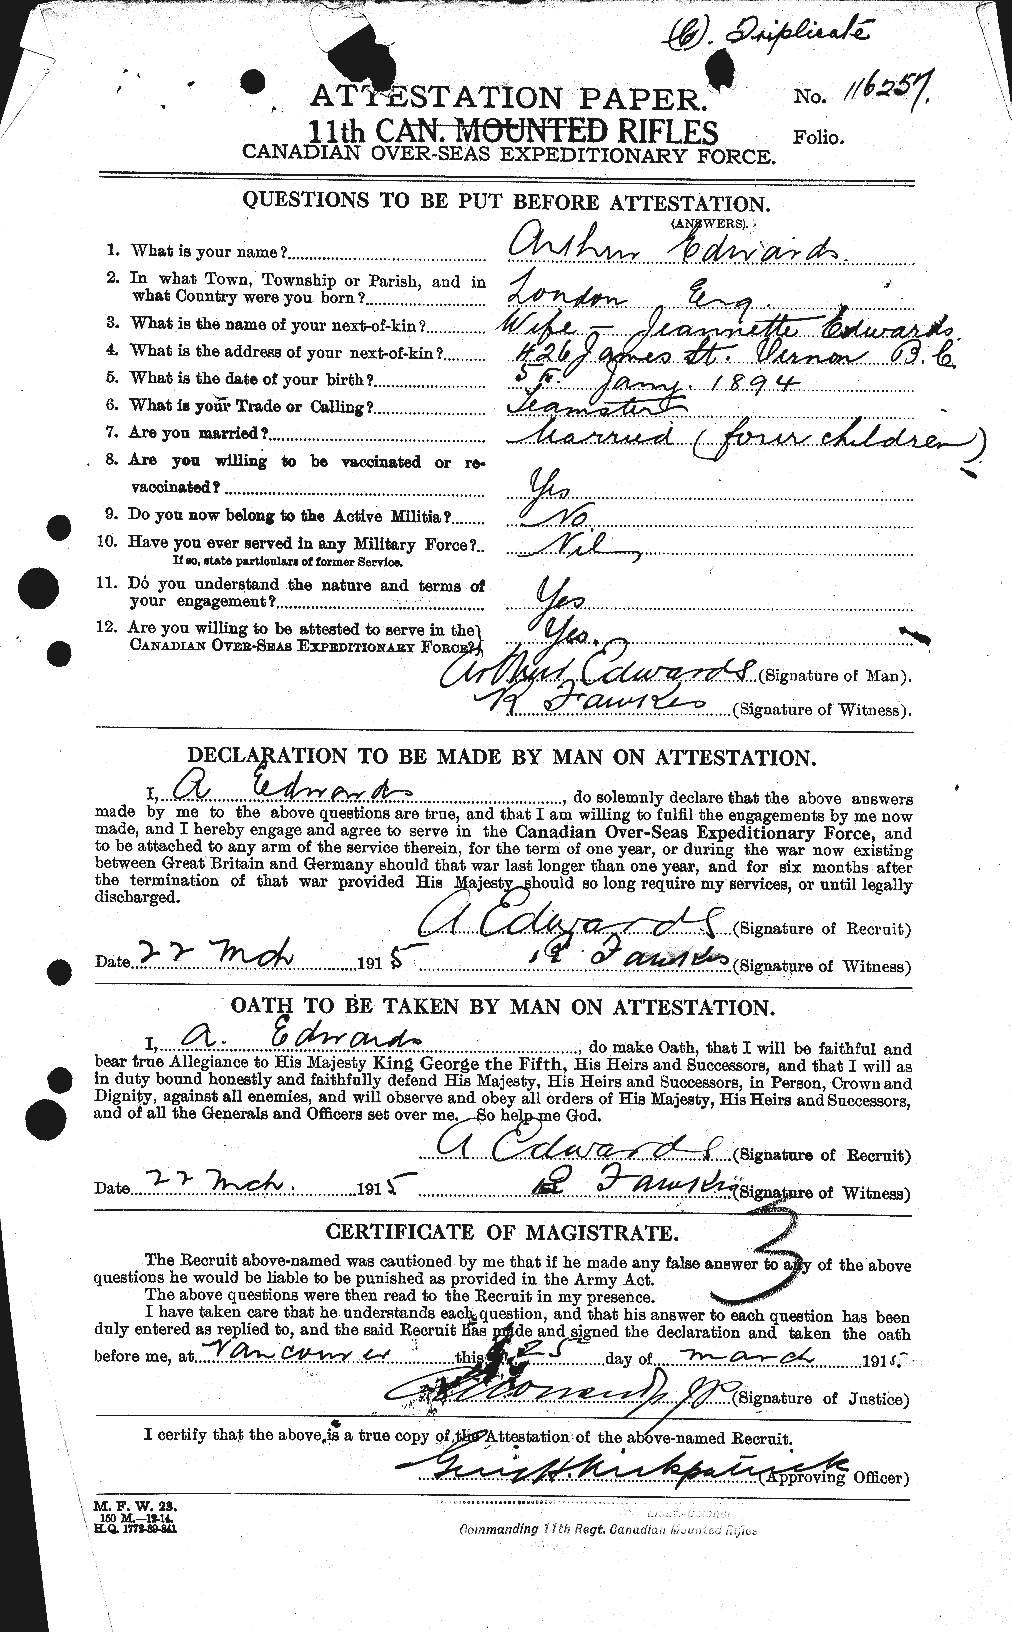 Personnel Records of the First World War - CEF 313130a